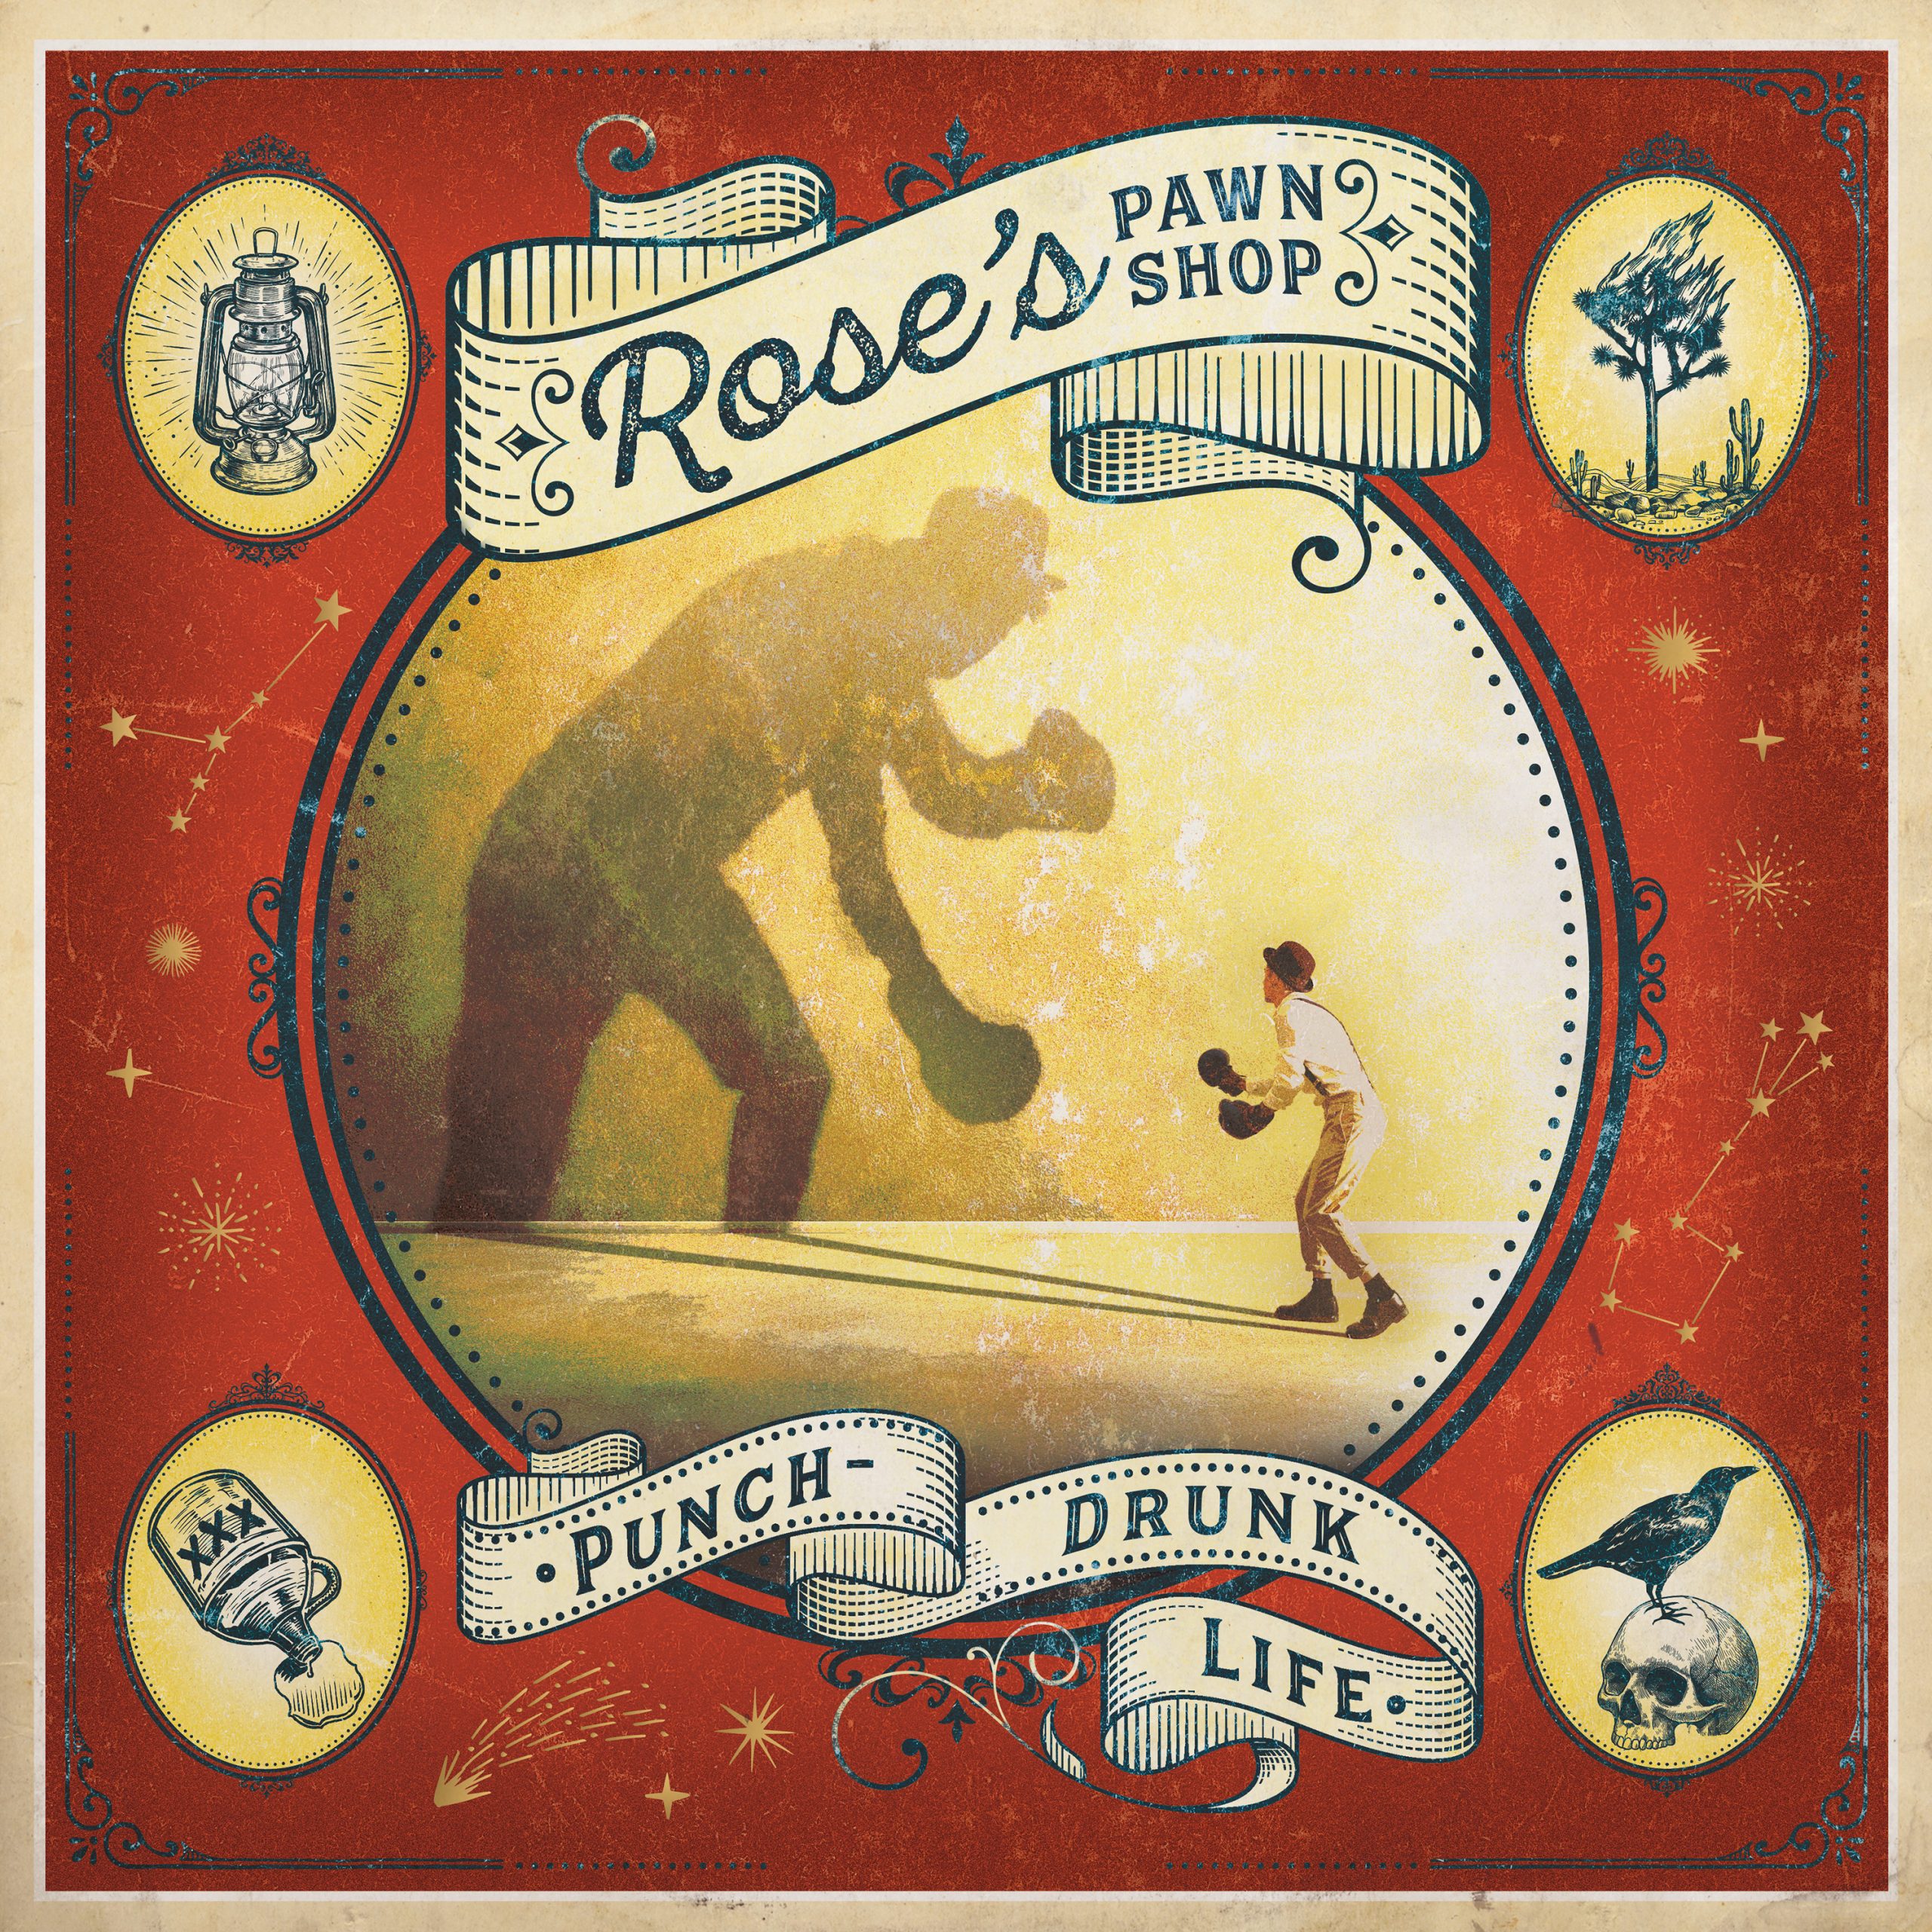 ROSE’S PAWN SHOP RELEASE “BETTER NOW” FROM LONG-AWAITED NEW ALBUM PUNCH-DRUNK LIFE OUT NOVEMBER 4